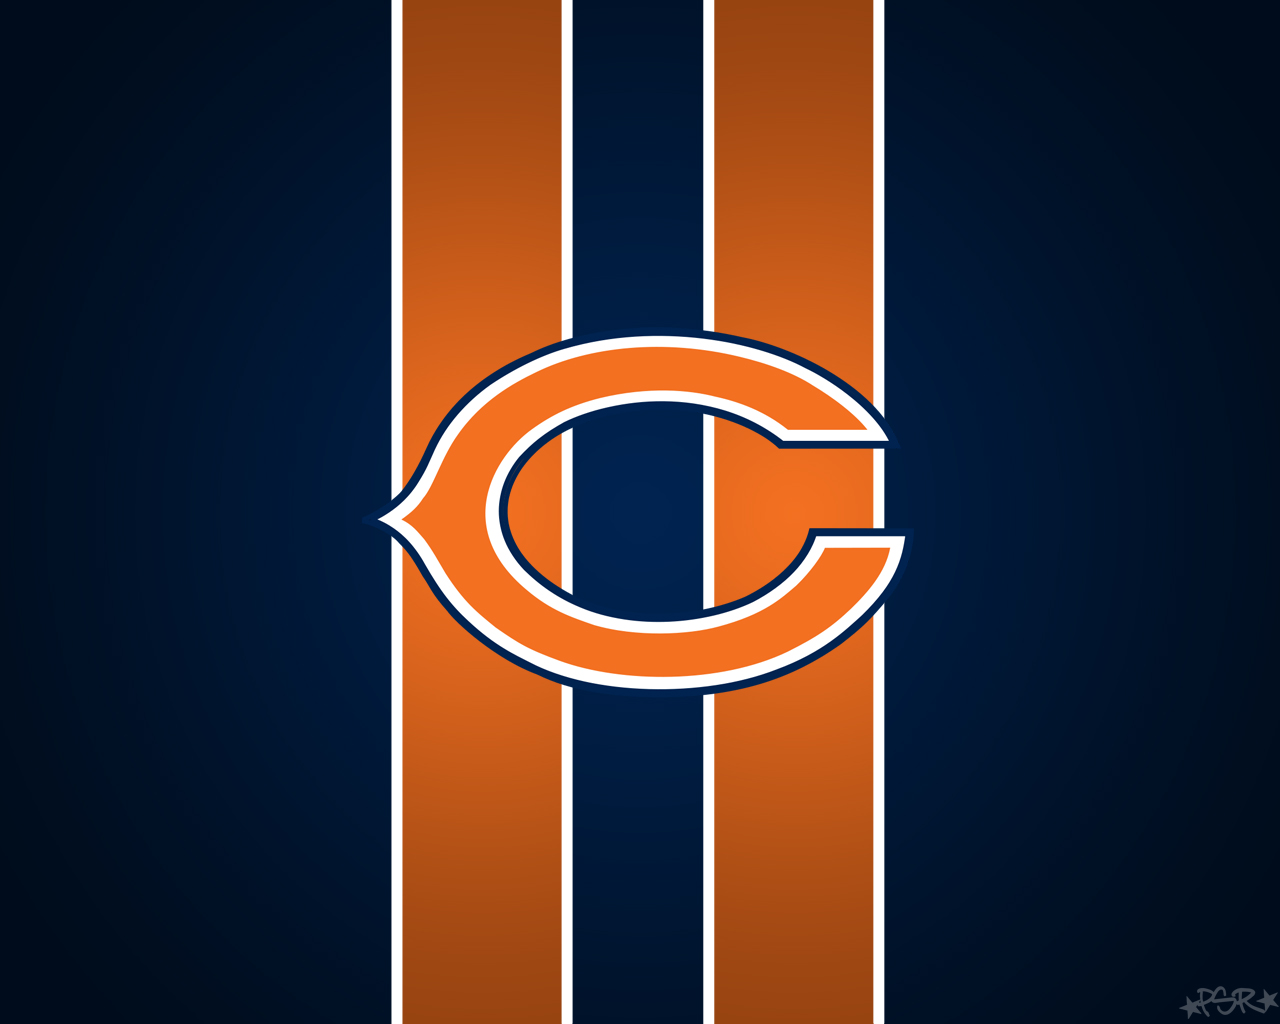 You can download Chicago Bears Team Wallpaper in your computer by